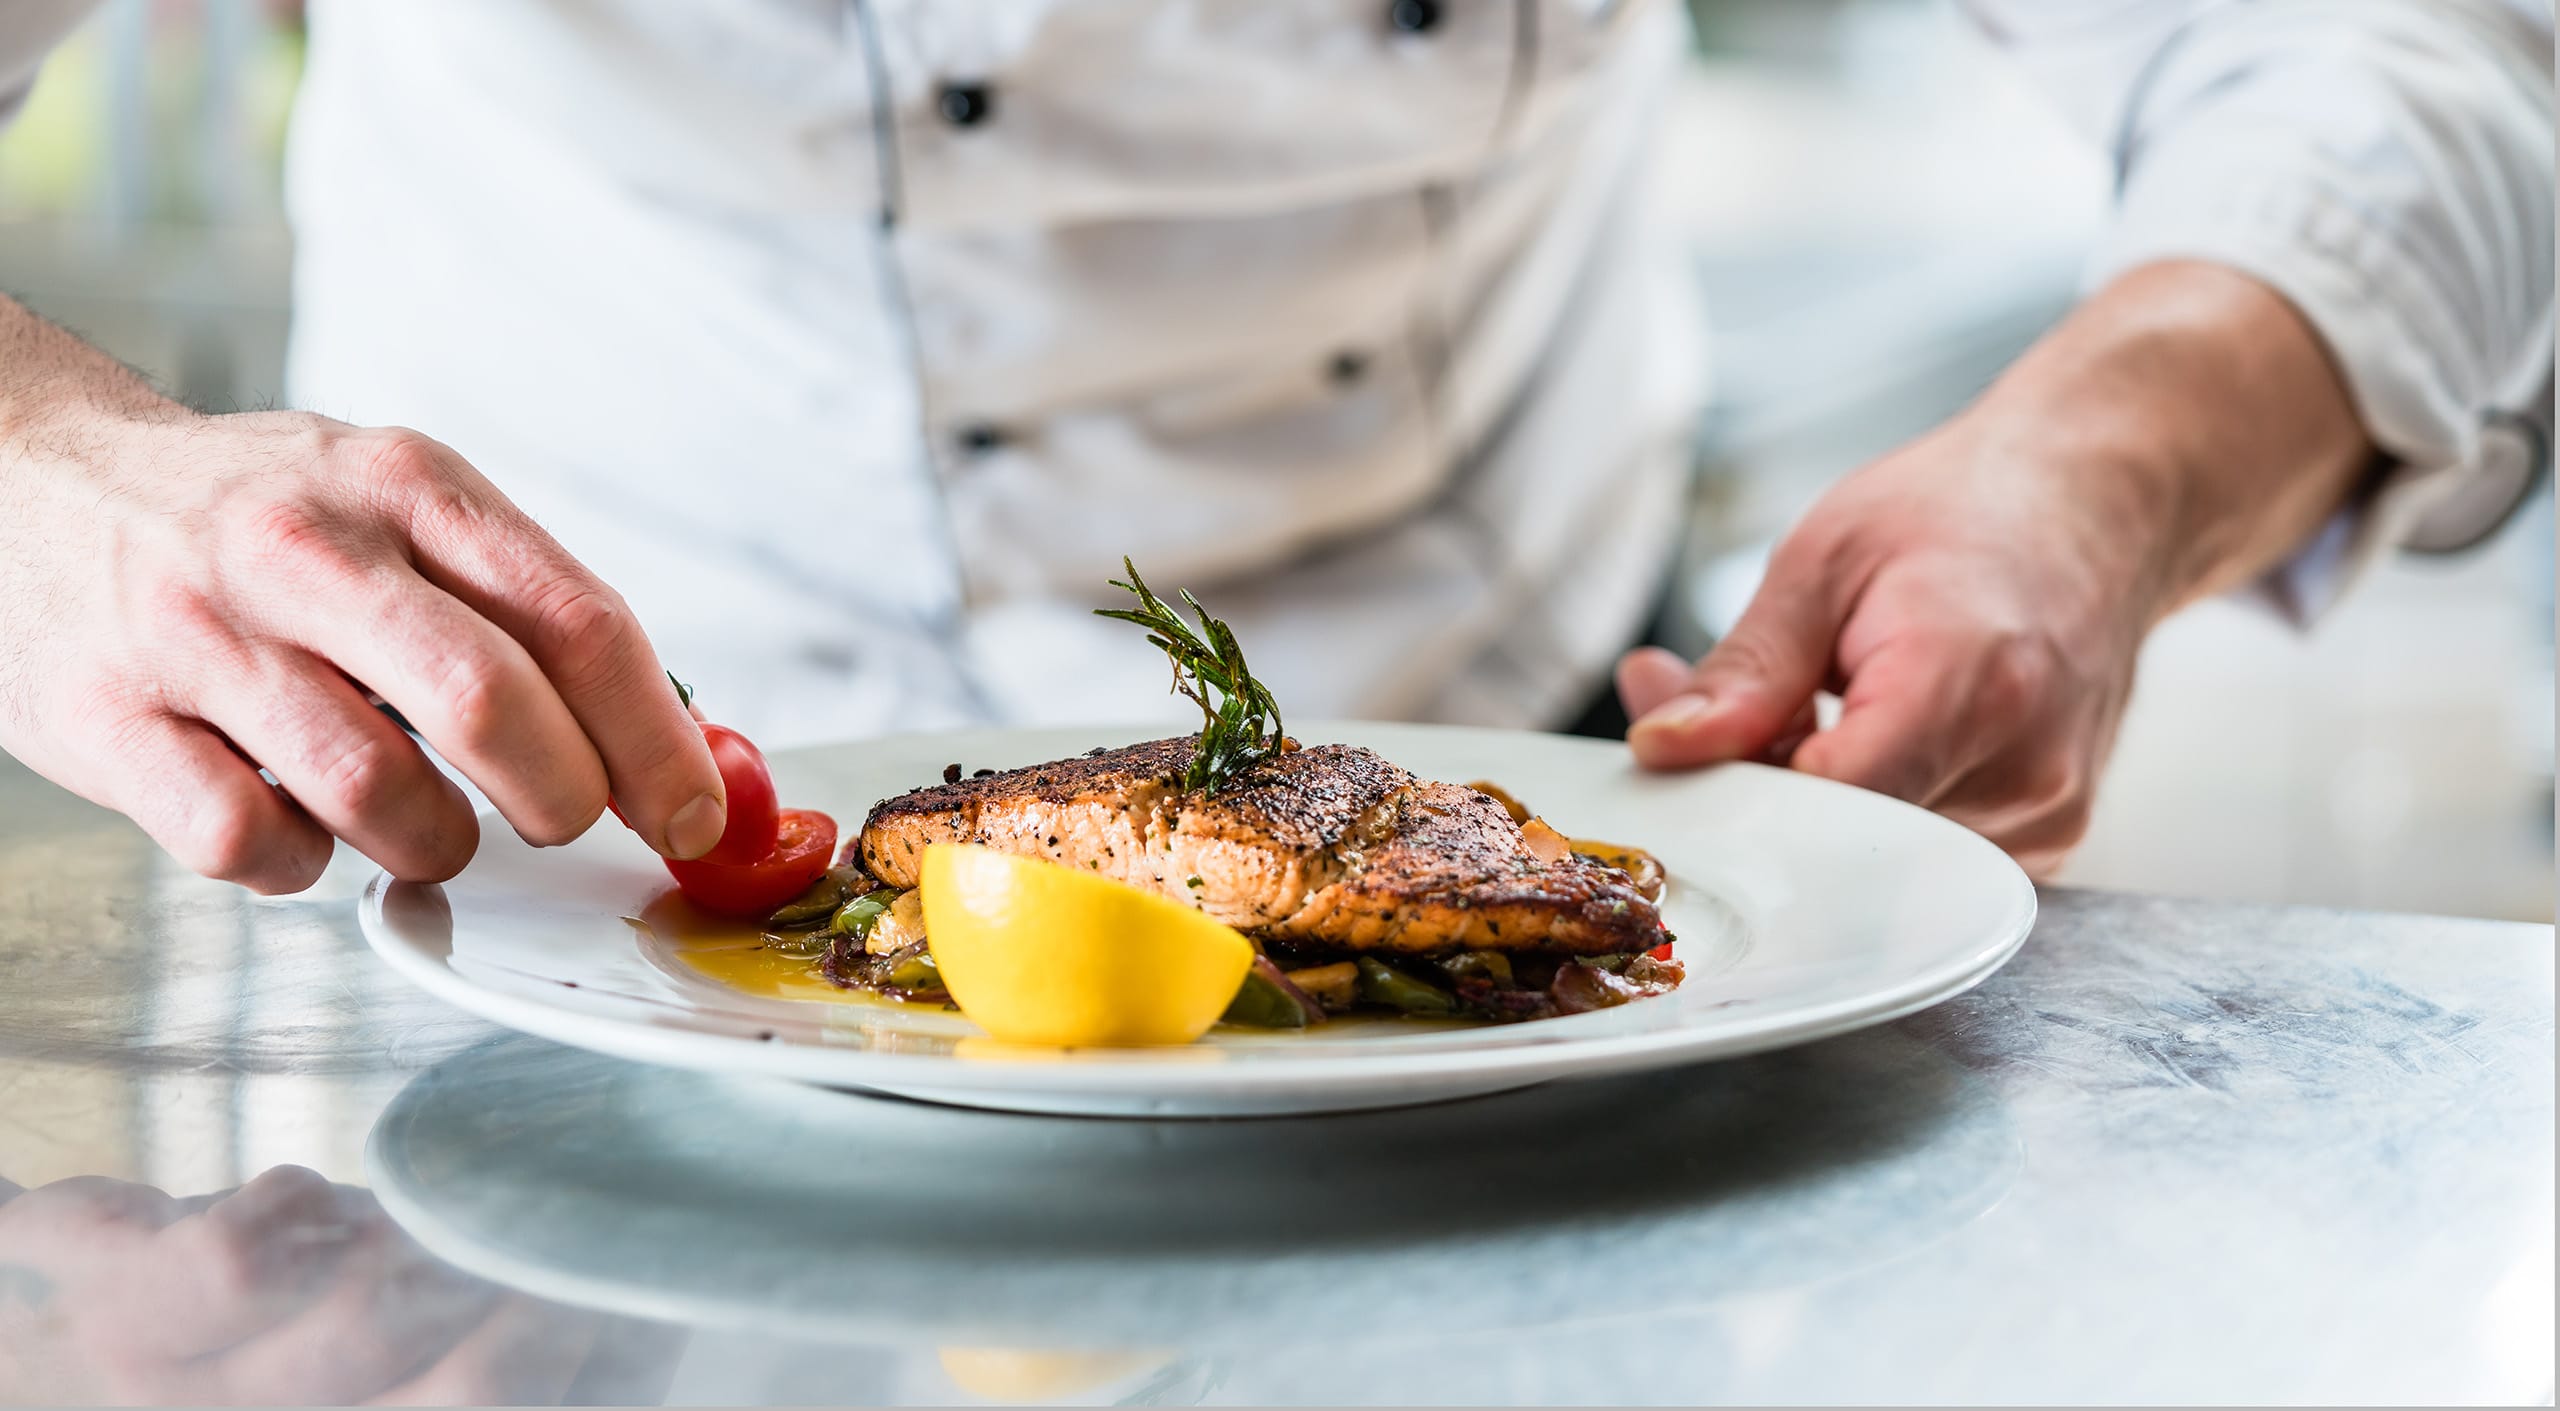 A chef's hands prepare a plate with grilled salmon, tomatoes and lemon to show healthy dining options